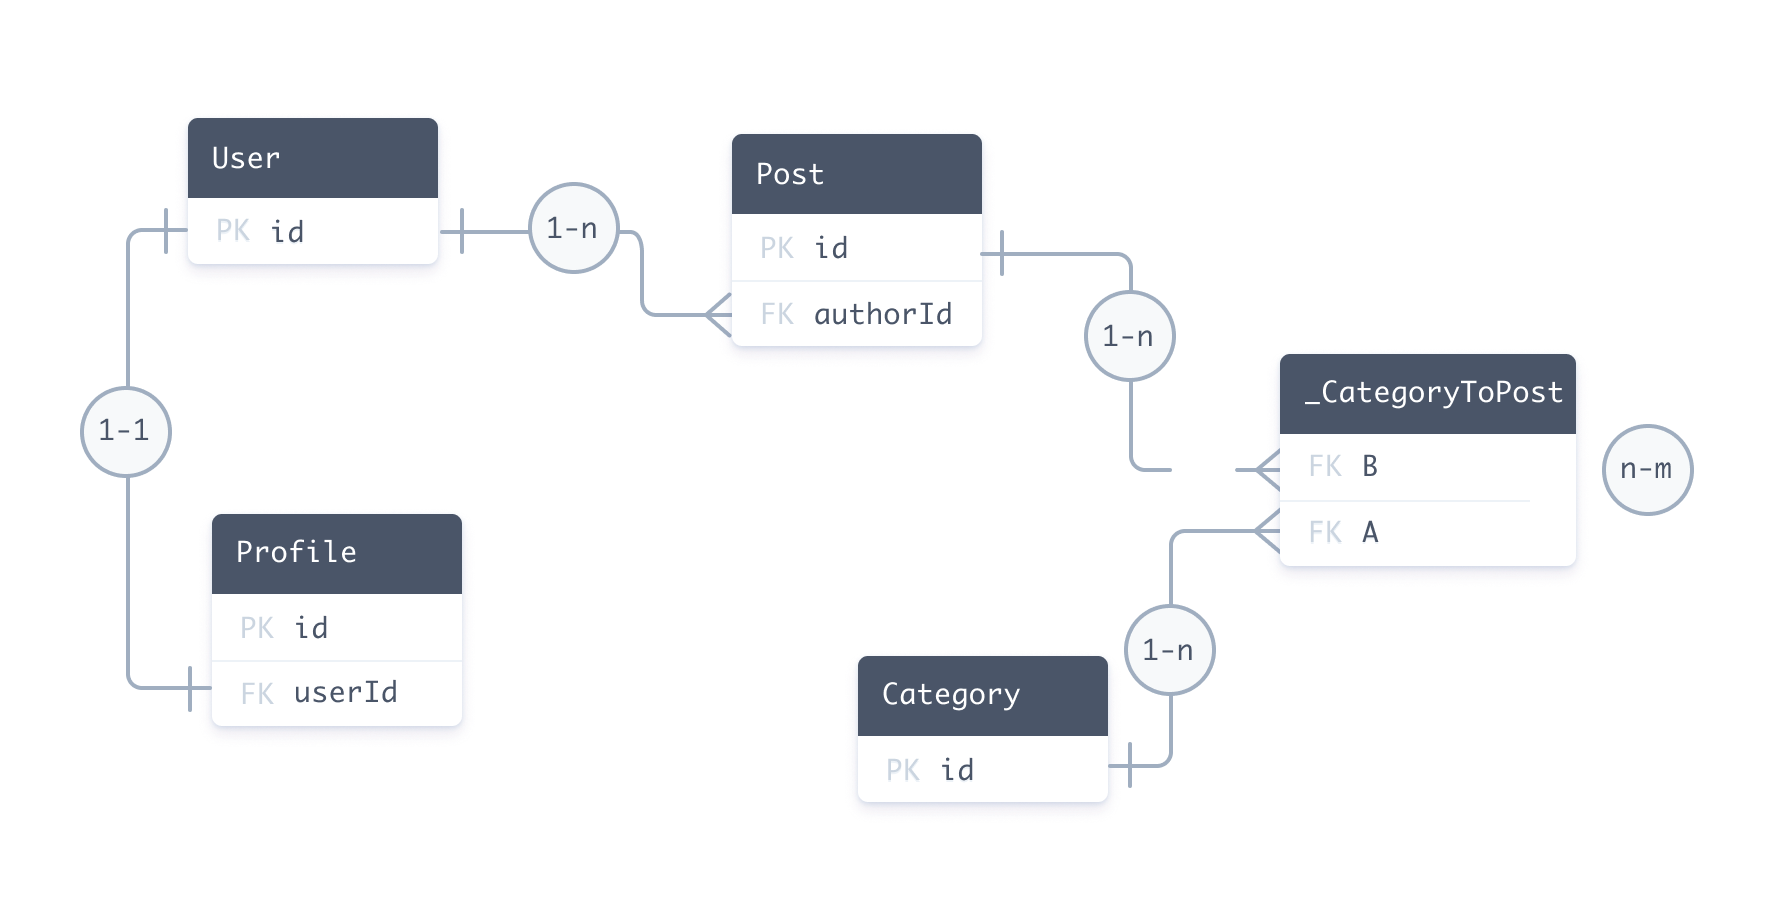 The sample schema as an entity relationship diagram